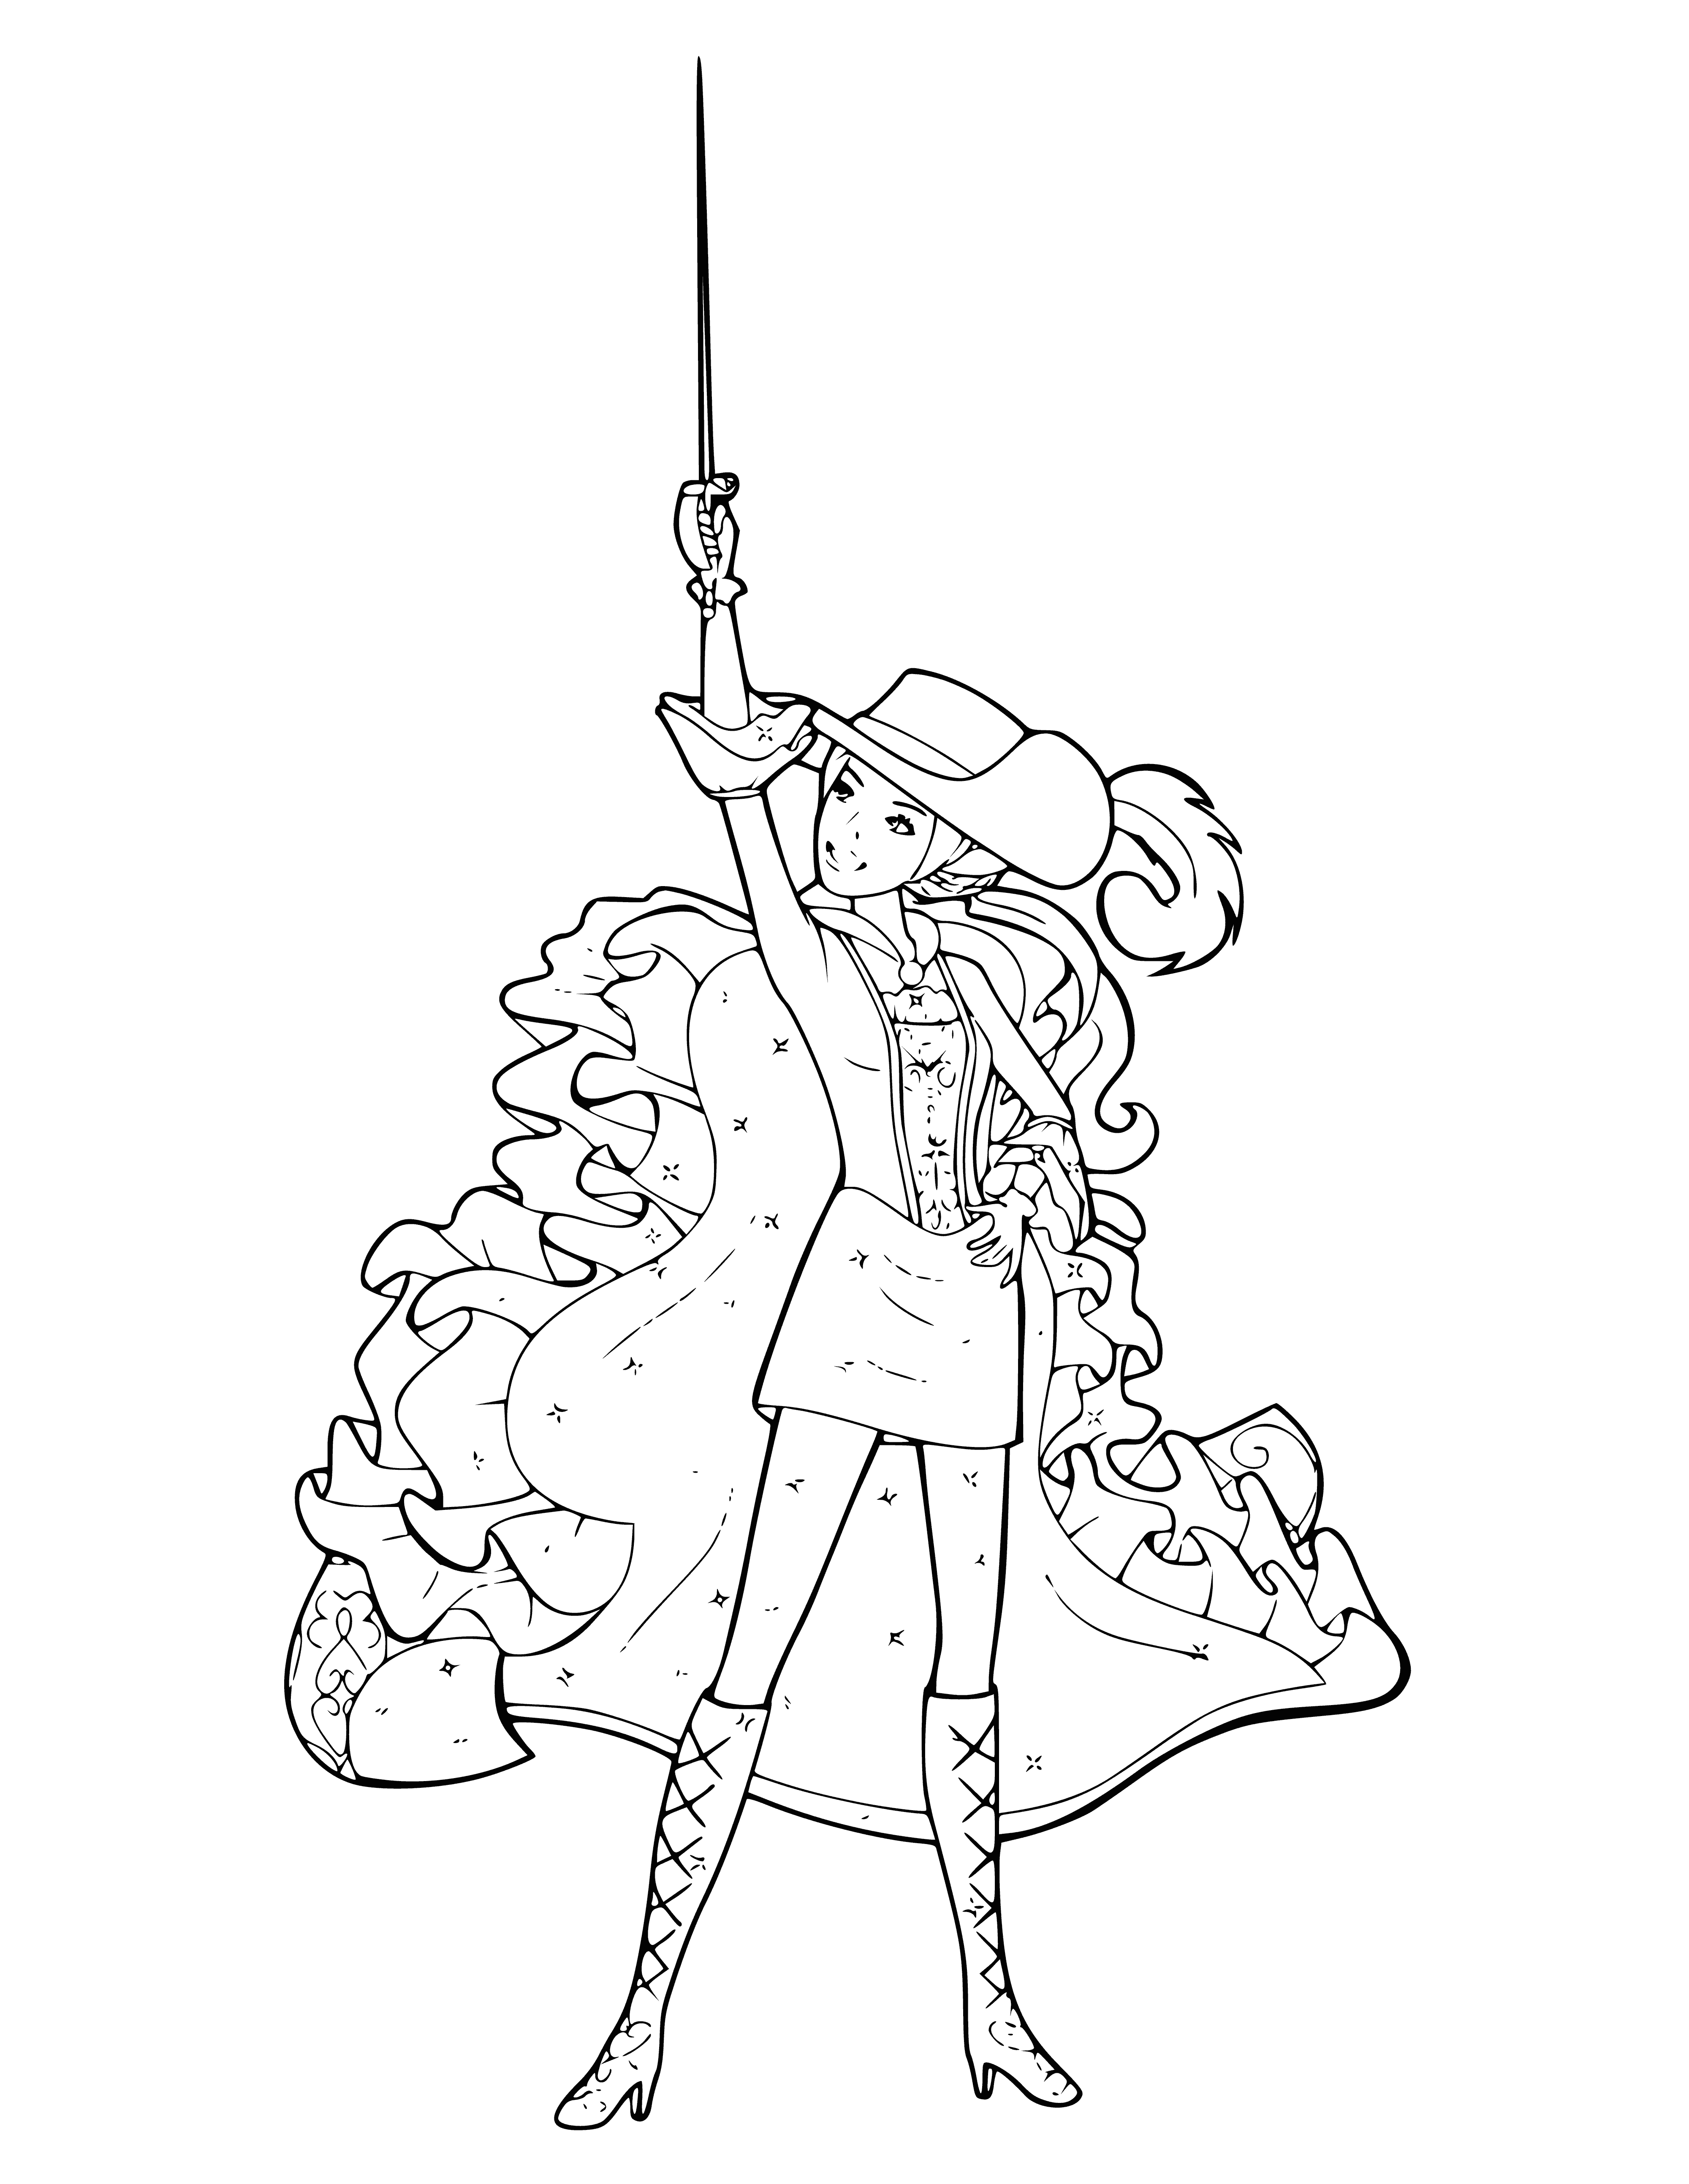 Barbie musketeer coloring page